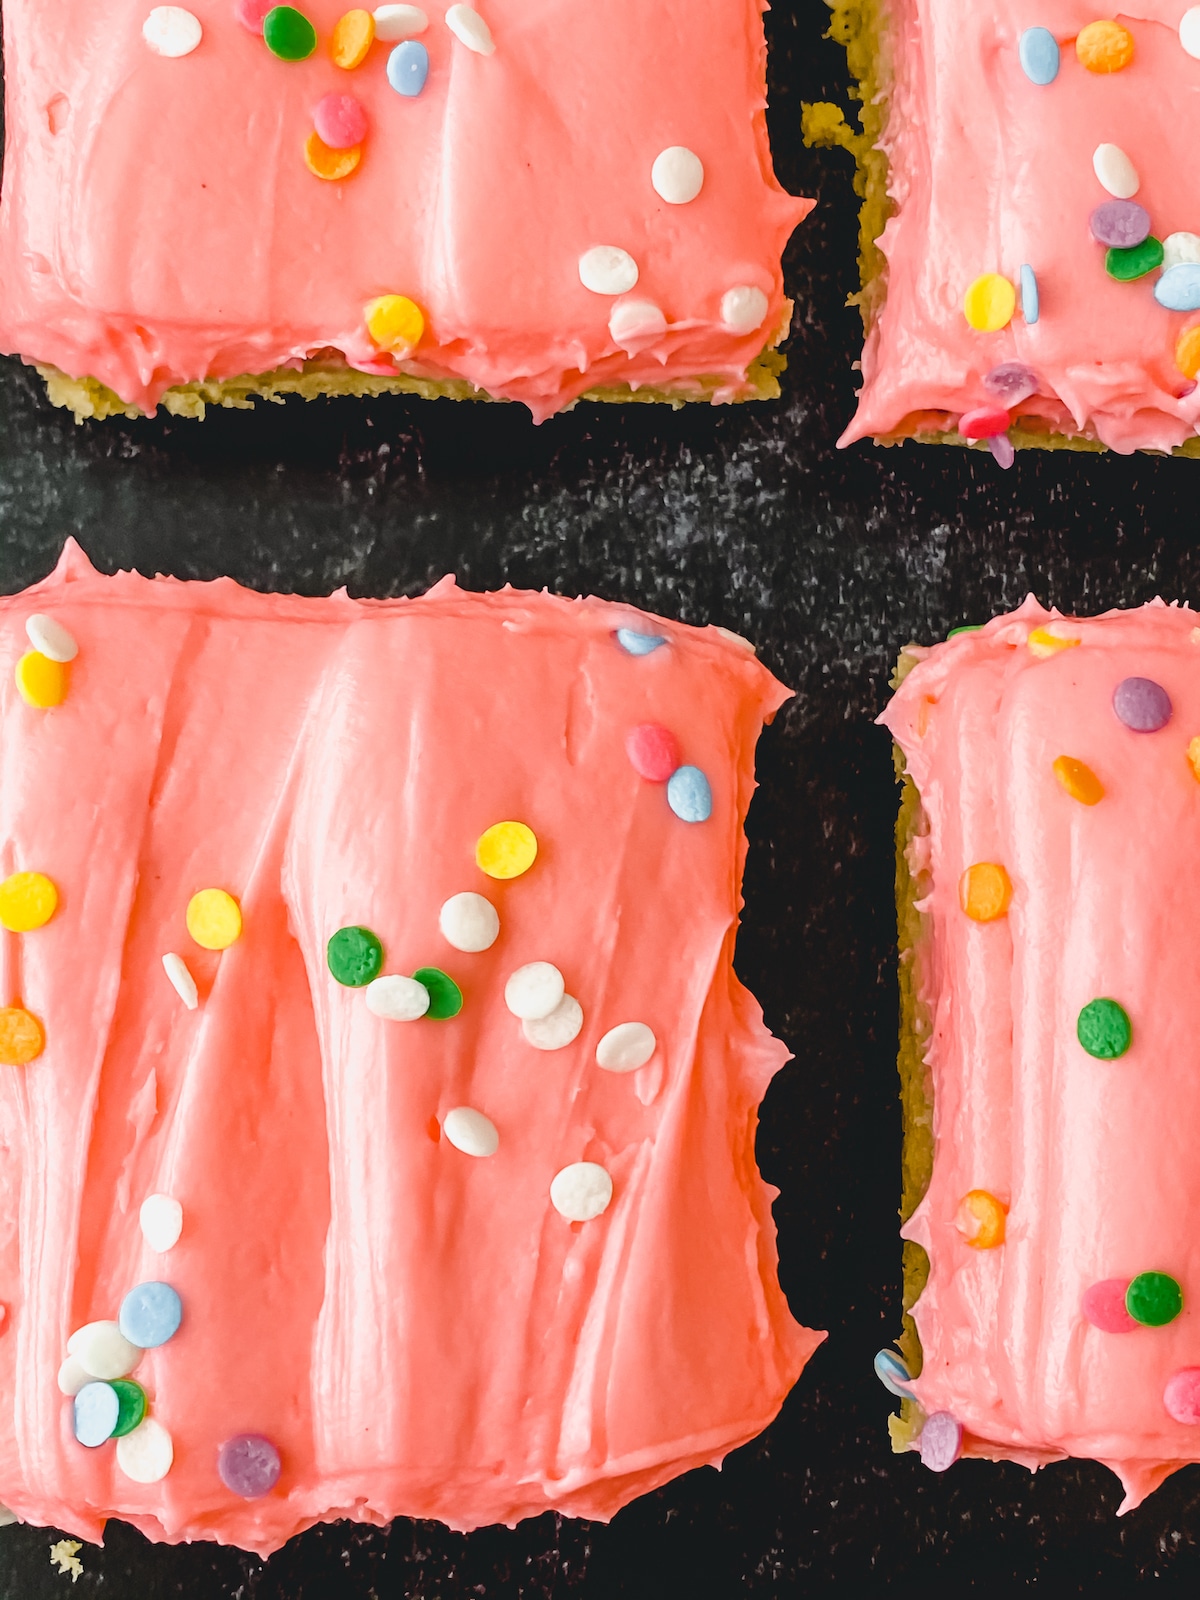 Pink frosted cake bar with sprinkles on black table